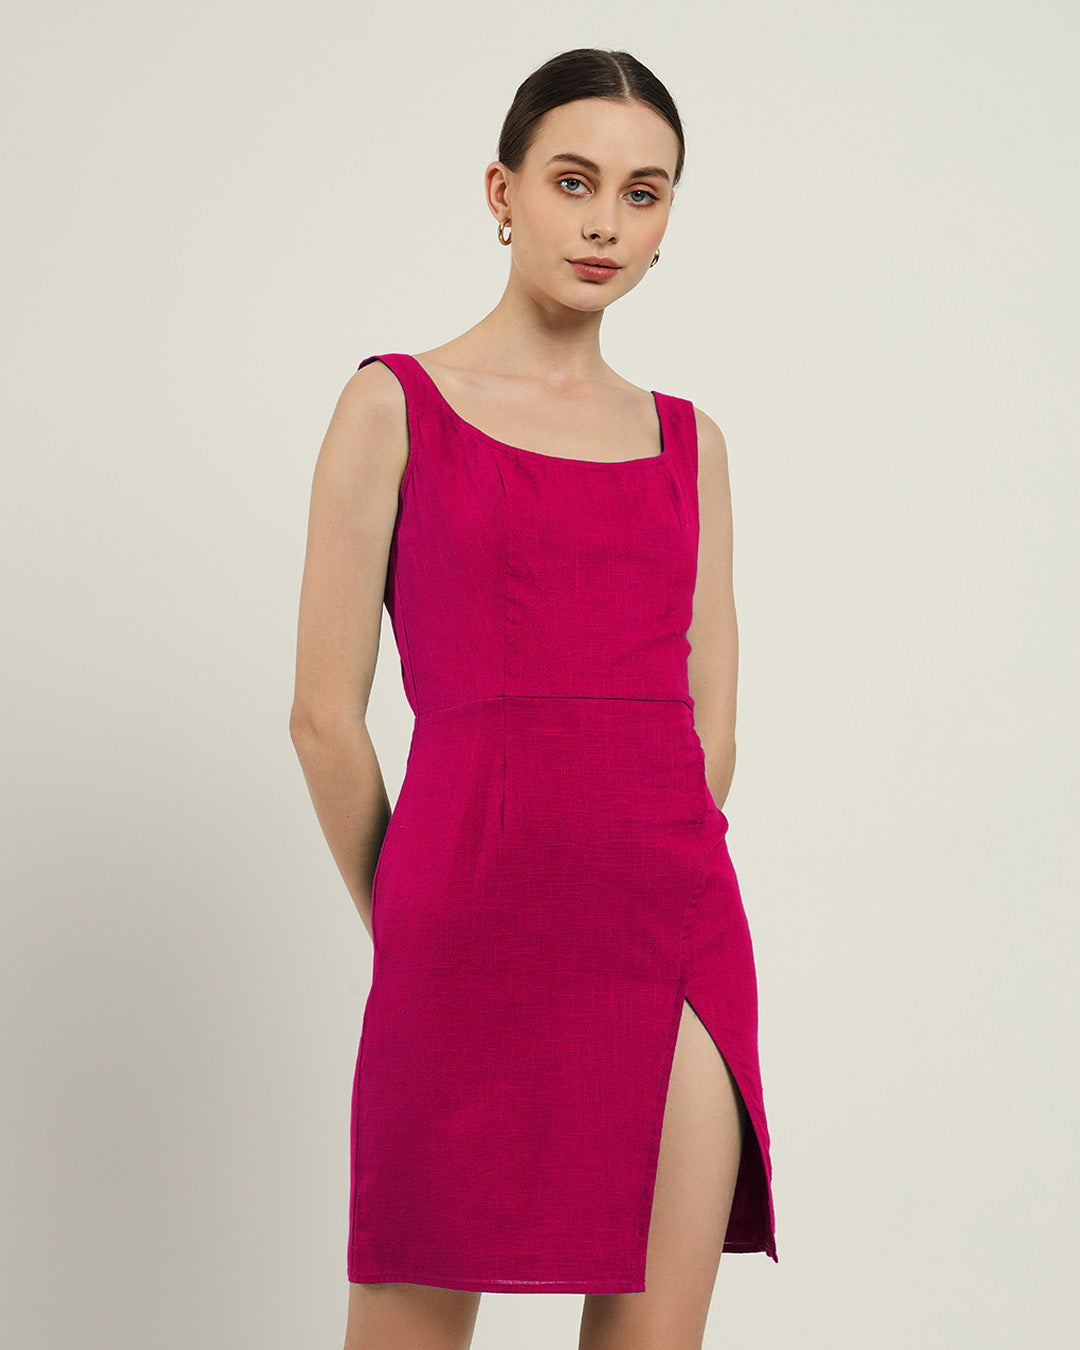 The Cannes Berry Cotton Dress